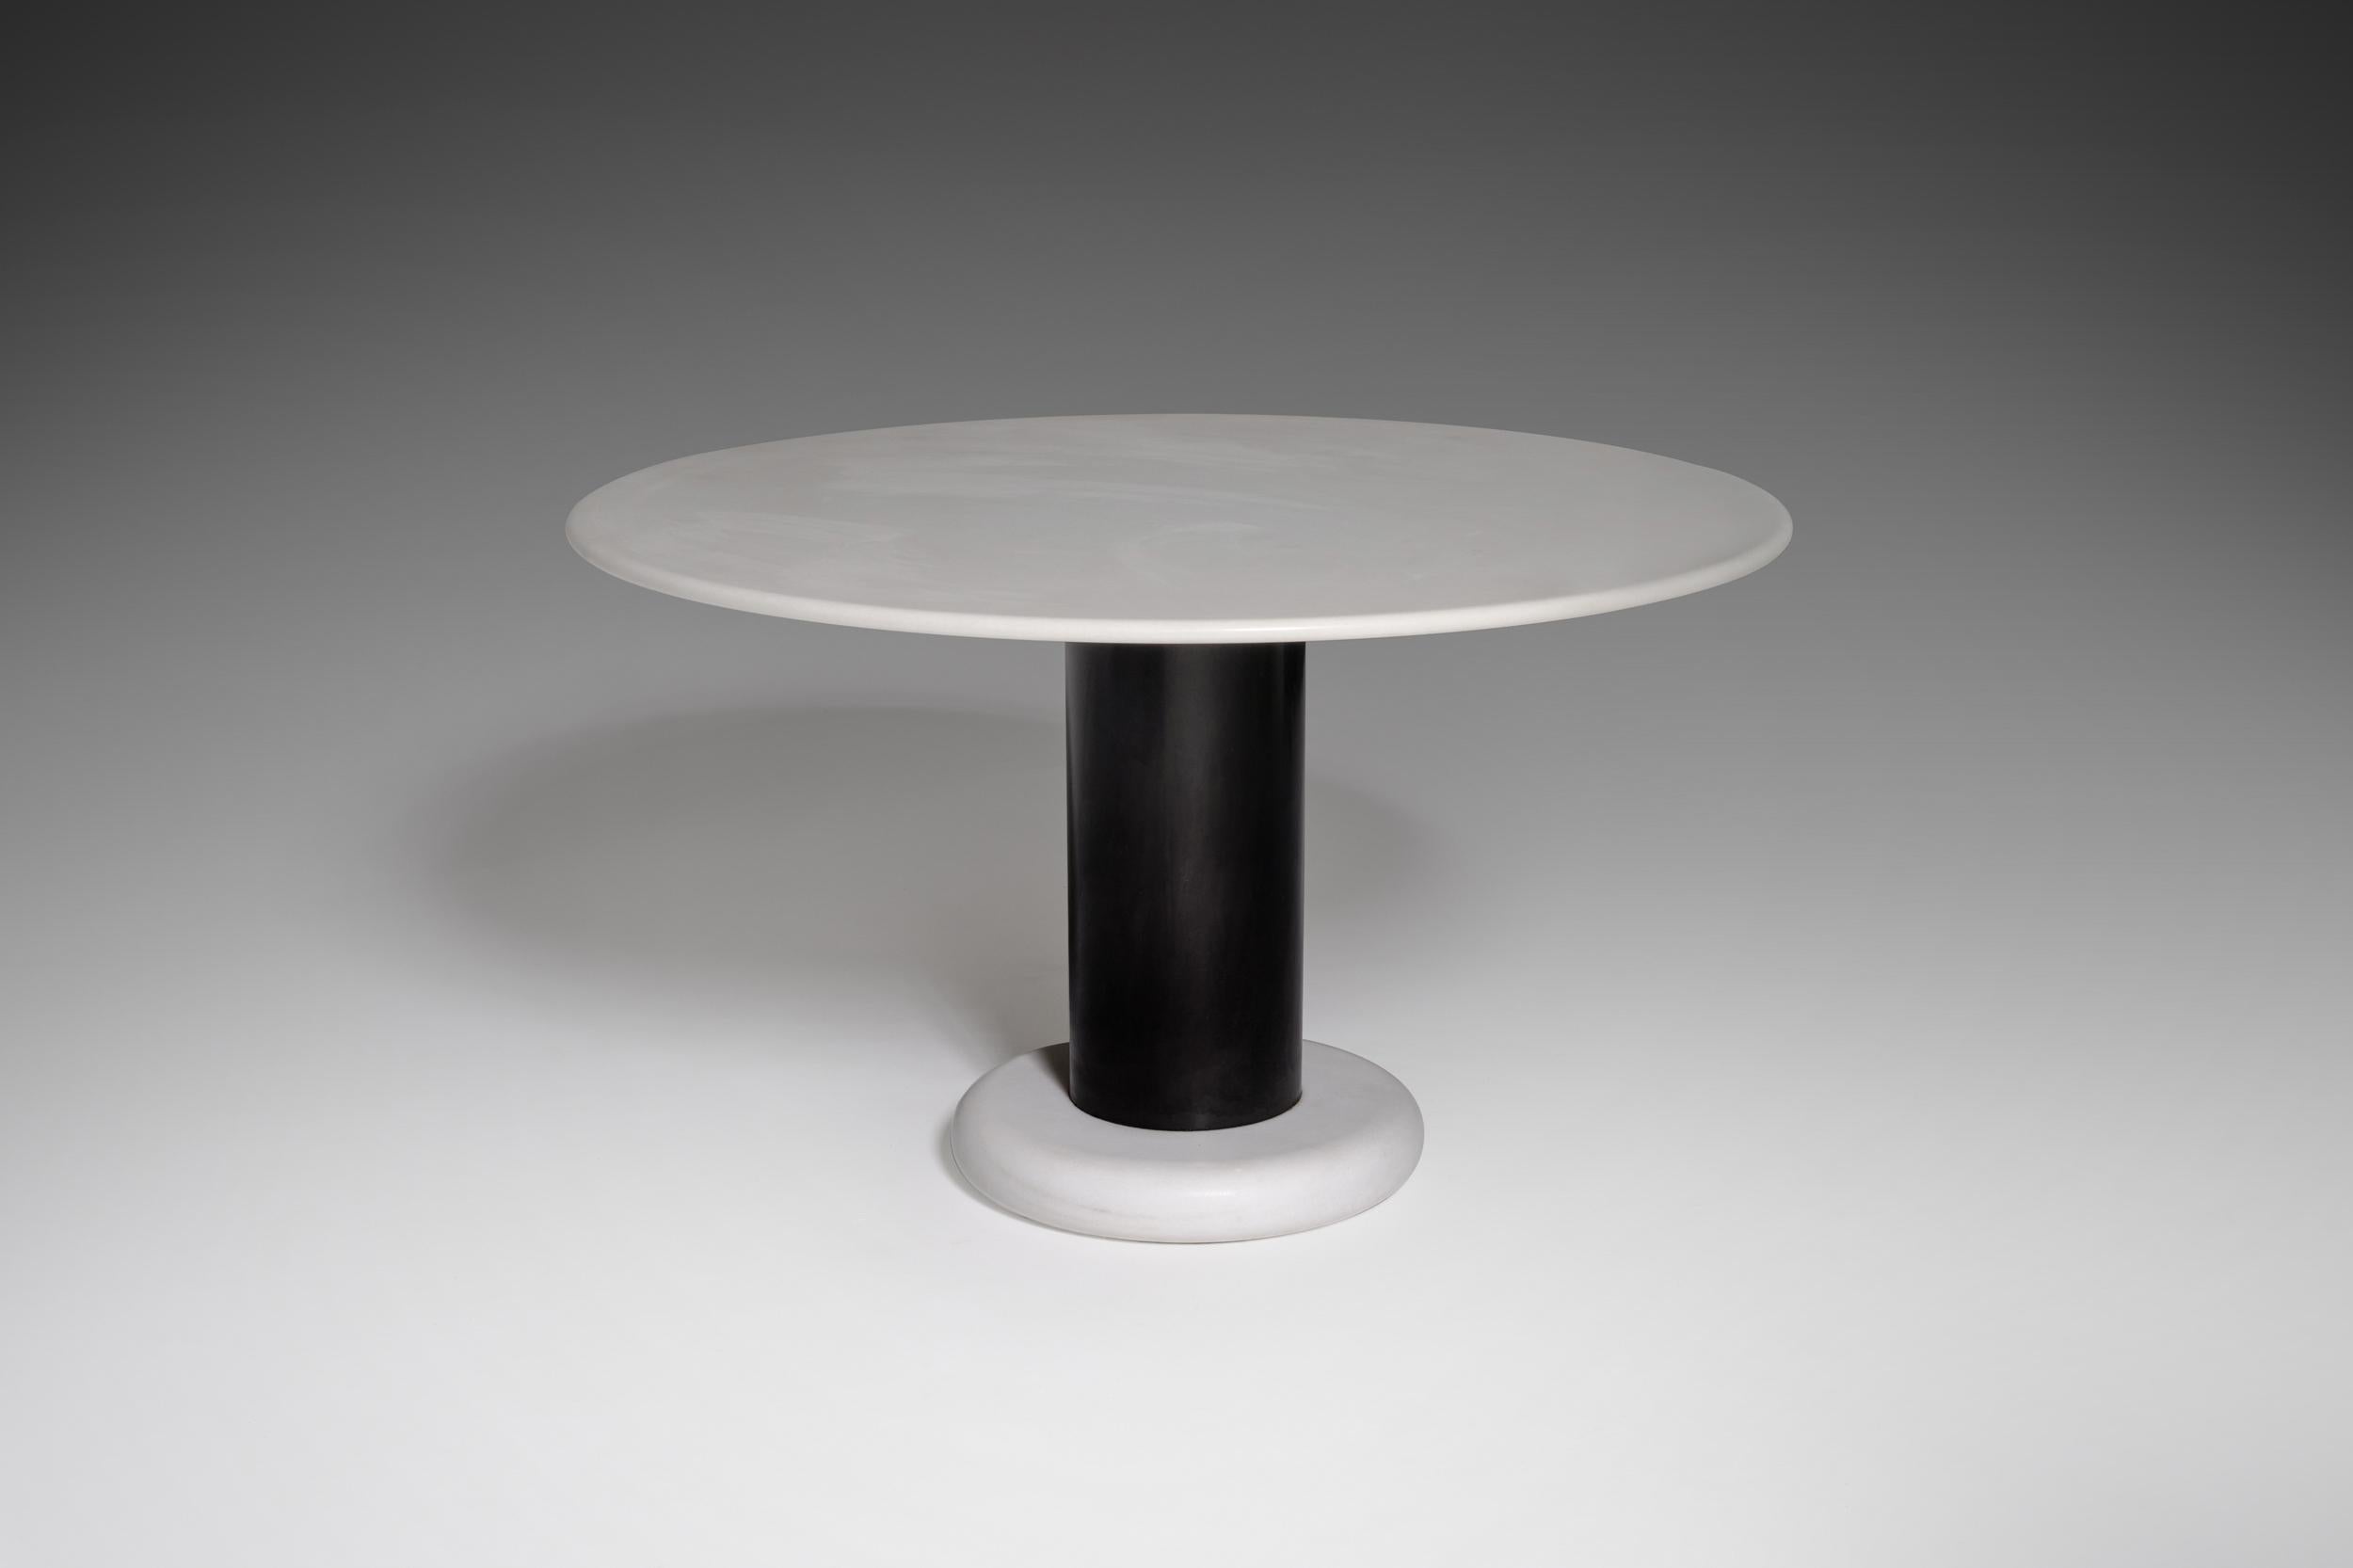 Exceptional ‘Lotto Rosso’ round pedestal dining table by Ettore Sottsass for Poltronova, Italy, 1965. Rare first production. Very well balanced design composed out of a round white marble top with nice C-shaped edges, a black lacquered metal